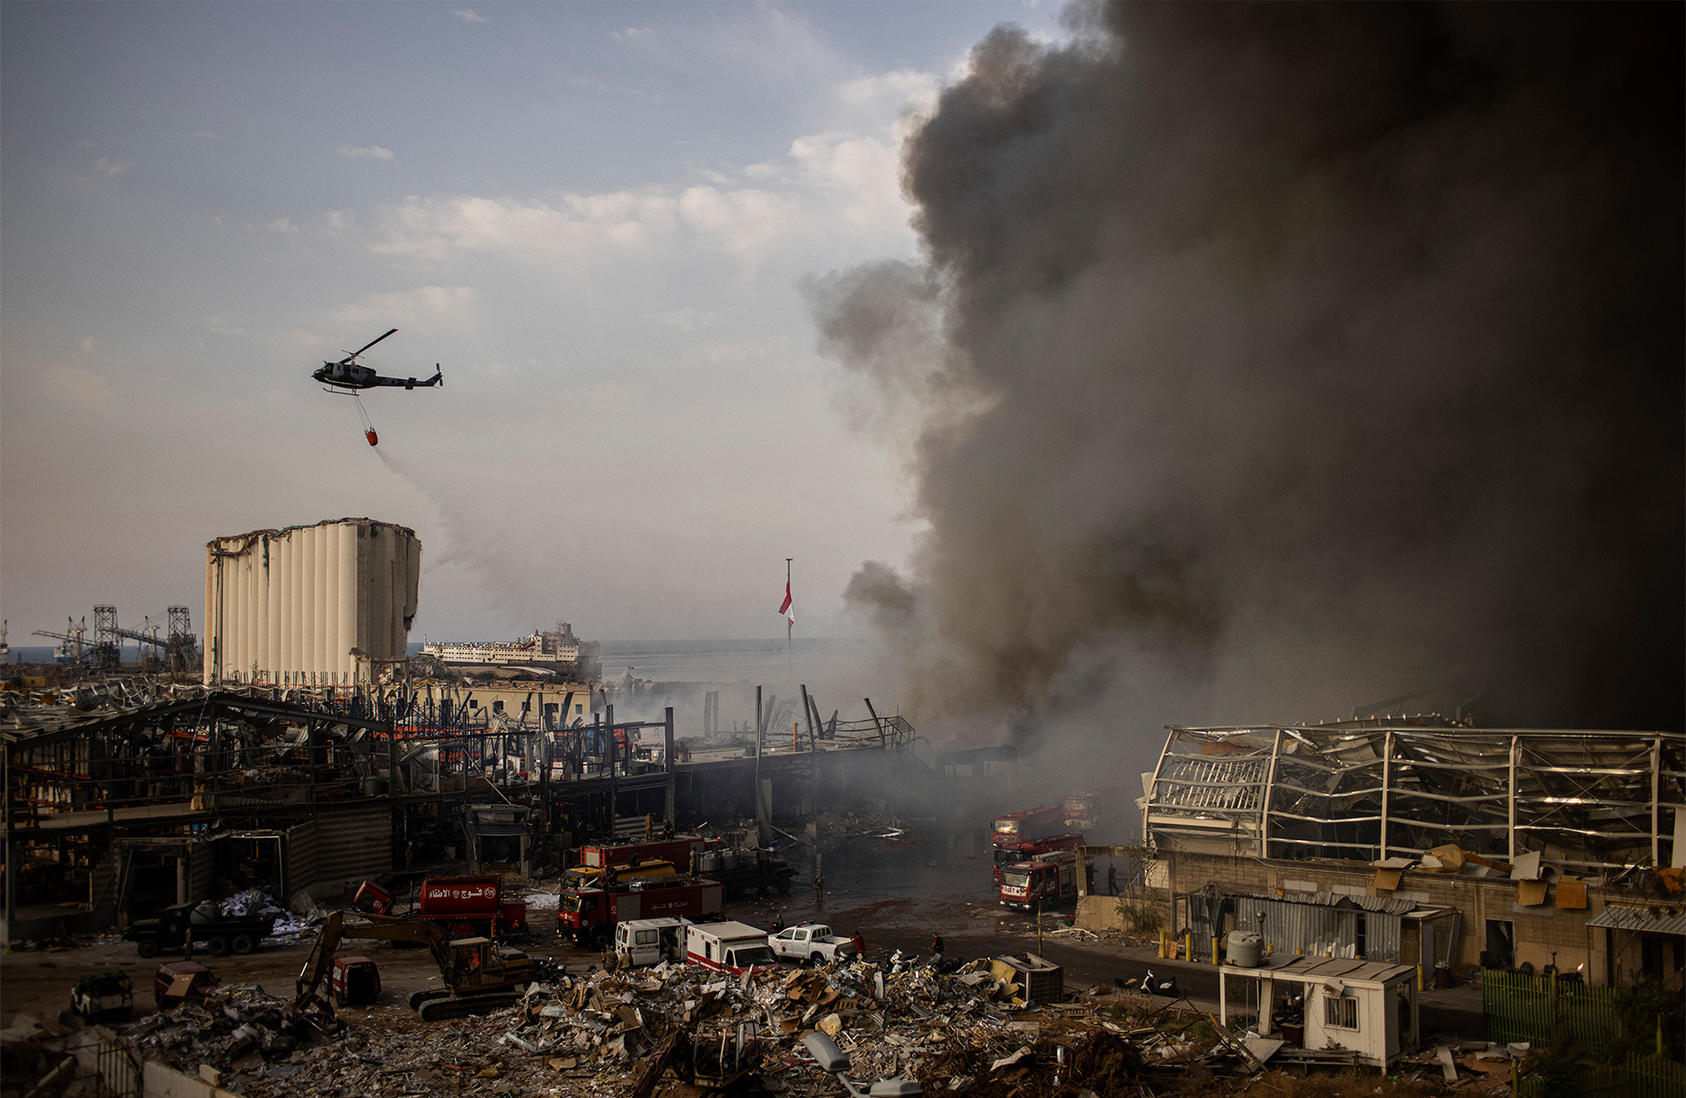 A helicopter drops fire retardant on a large fire that erupted in Beirut’s port on Thursday, Sept. 10, 2020, terrifying residents still recovering from the horrific Aug. 4 port explosion. (Diego Ibarra Sanchez/The New York Times)